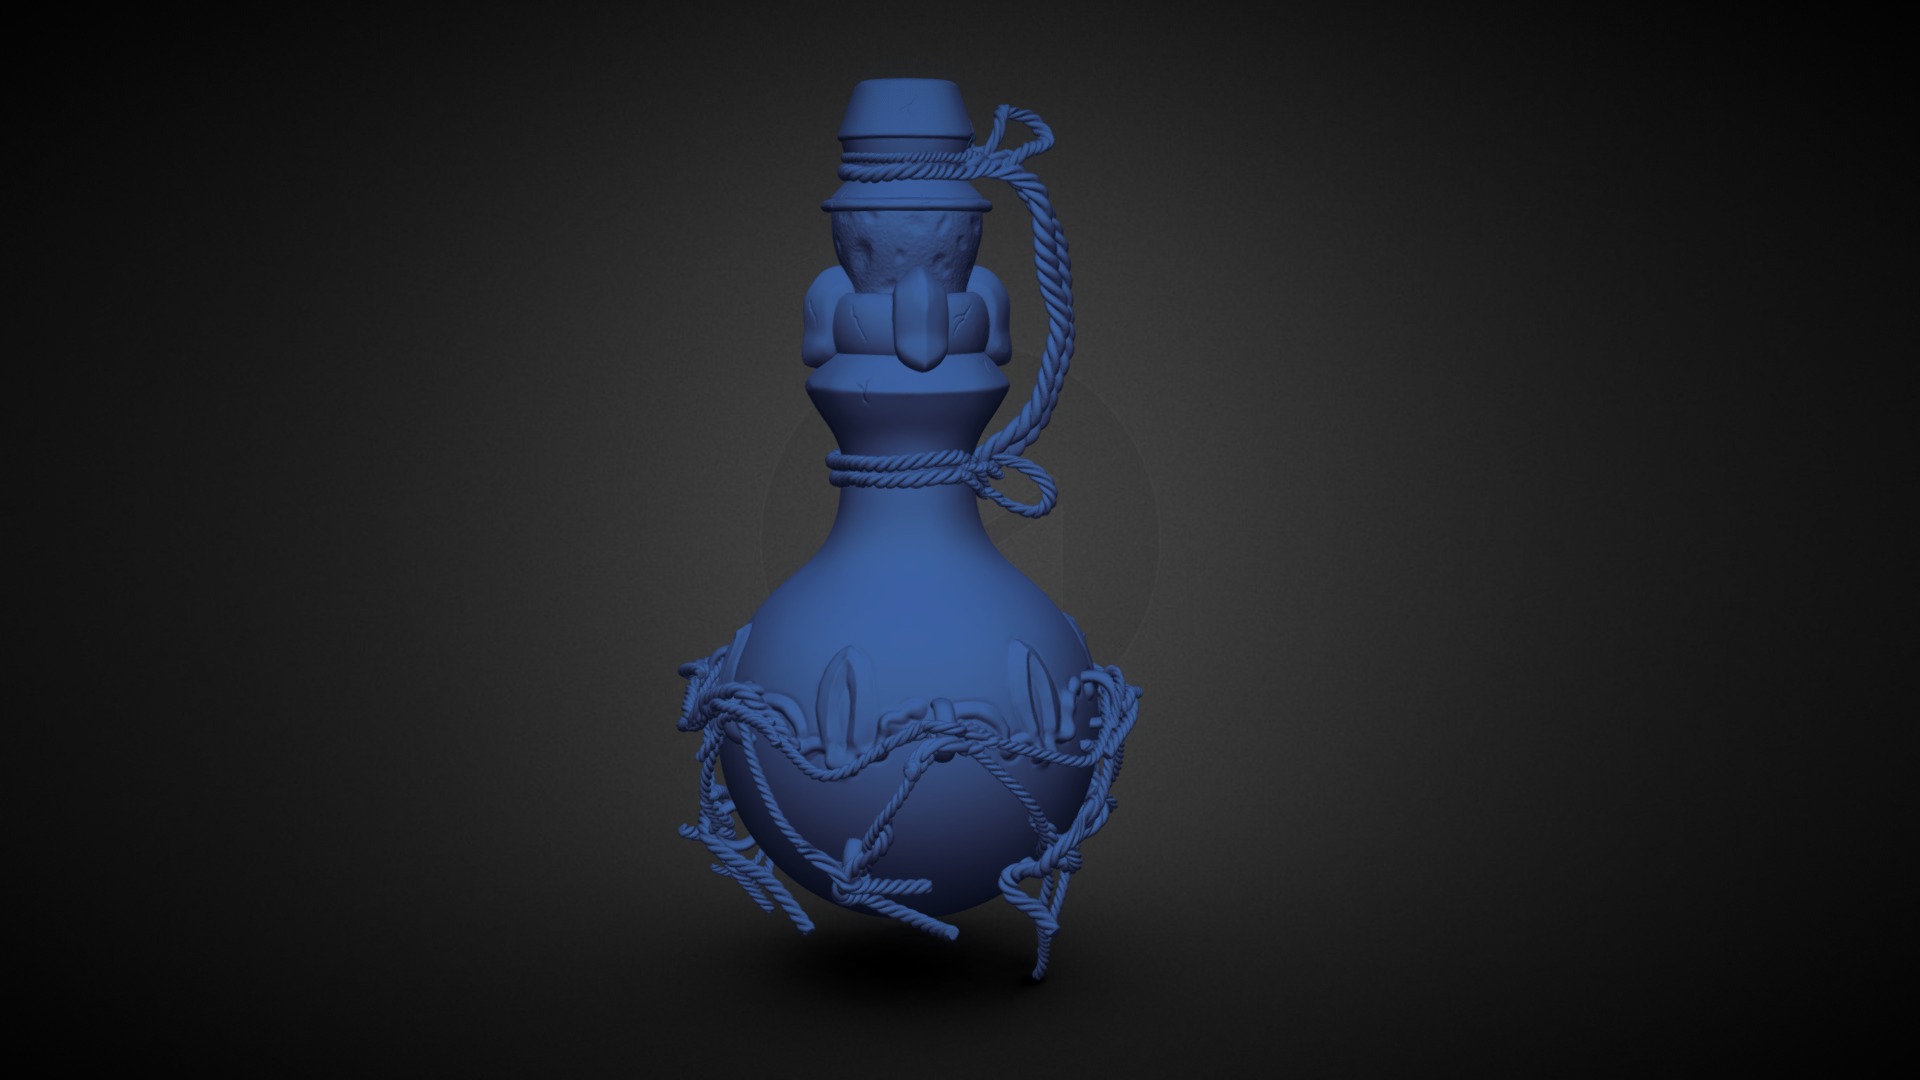 3D model Day 25 Healing Potion #Sculptjanuary19 - This is a 3D model of the Day 25 Healing Potion #Sculptjanuary19. The 3D model is about a blue and white sculpture.